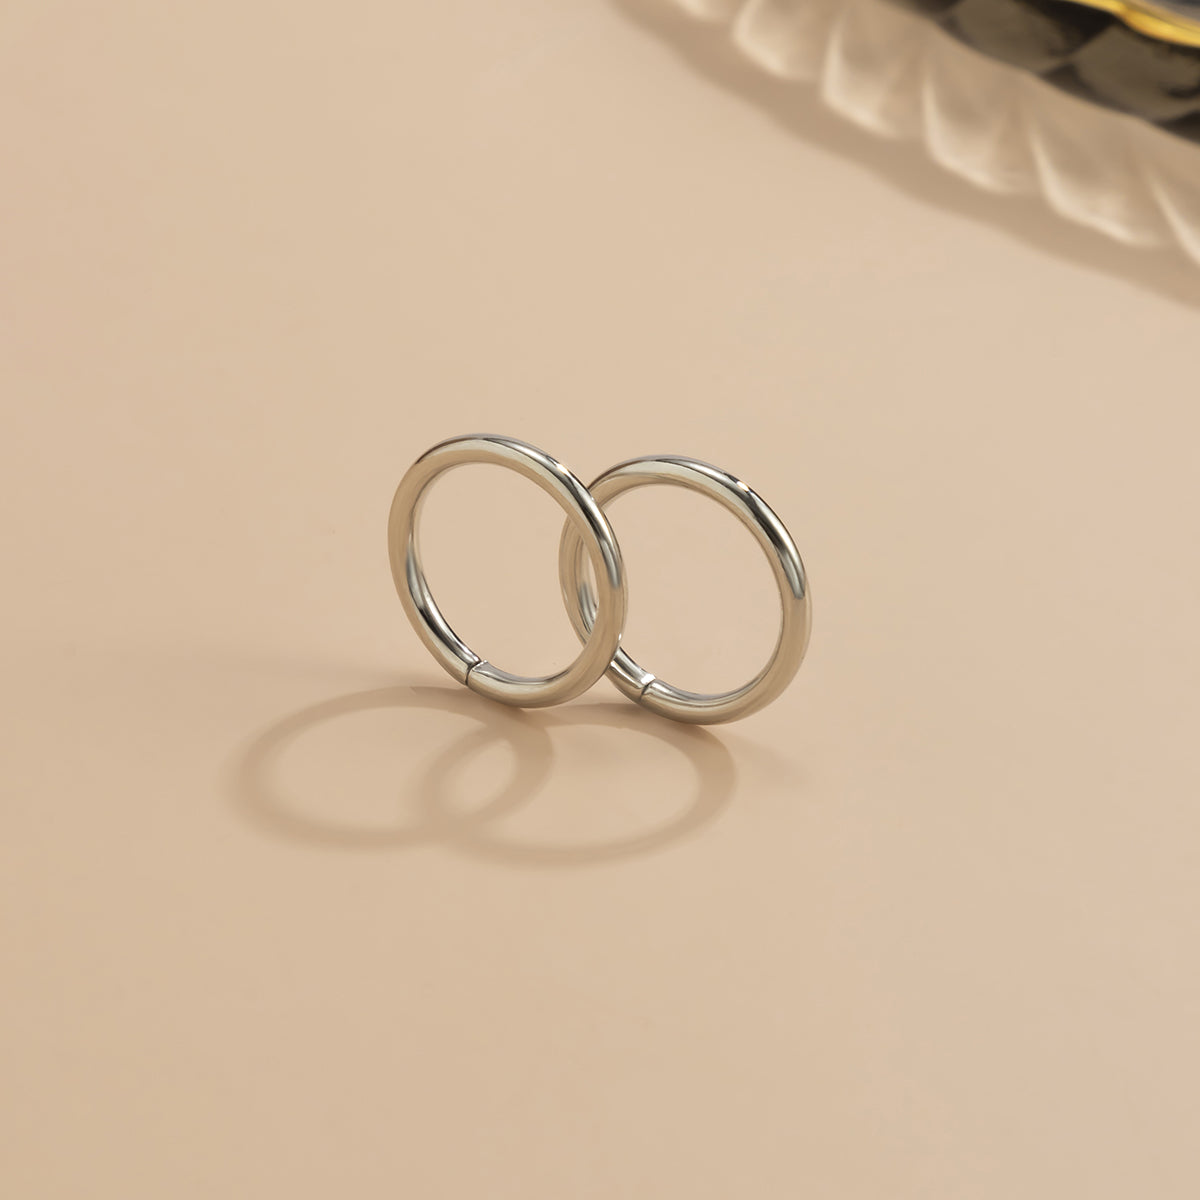 Silver-Plated Polished Toe Ring Set